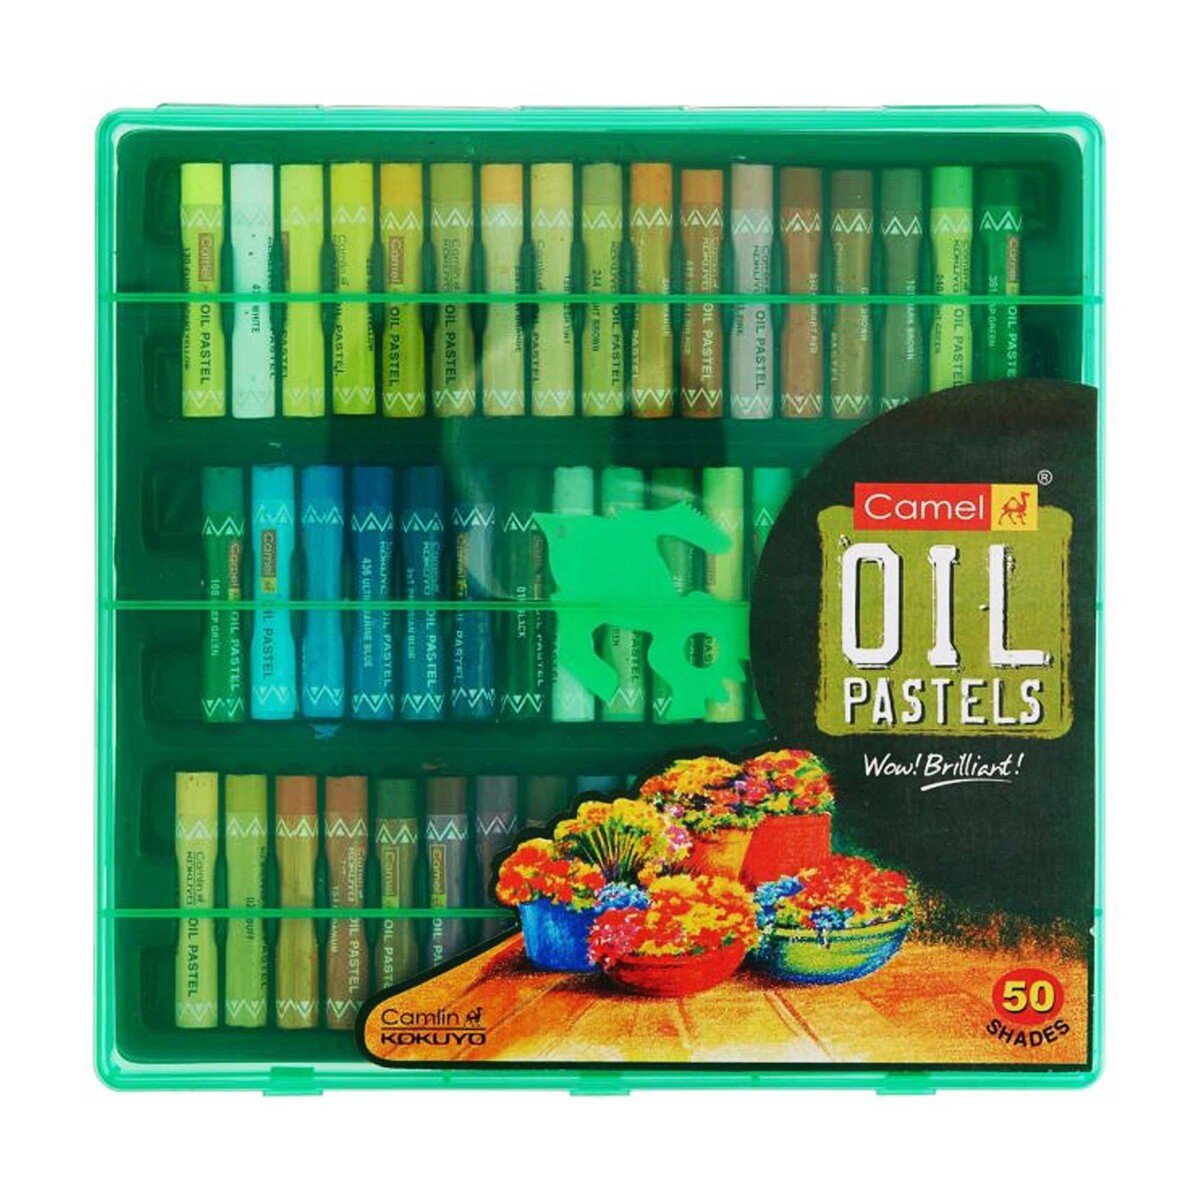 Camel Oil Pastels 50 Shades With Reusable Plastic Box